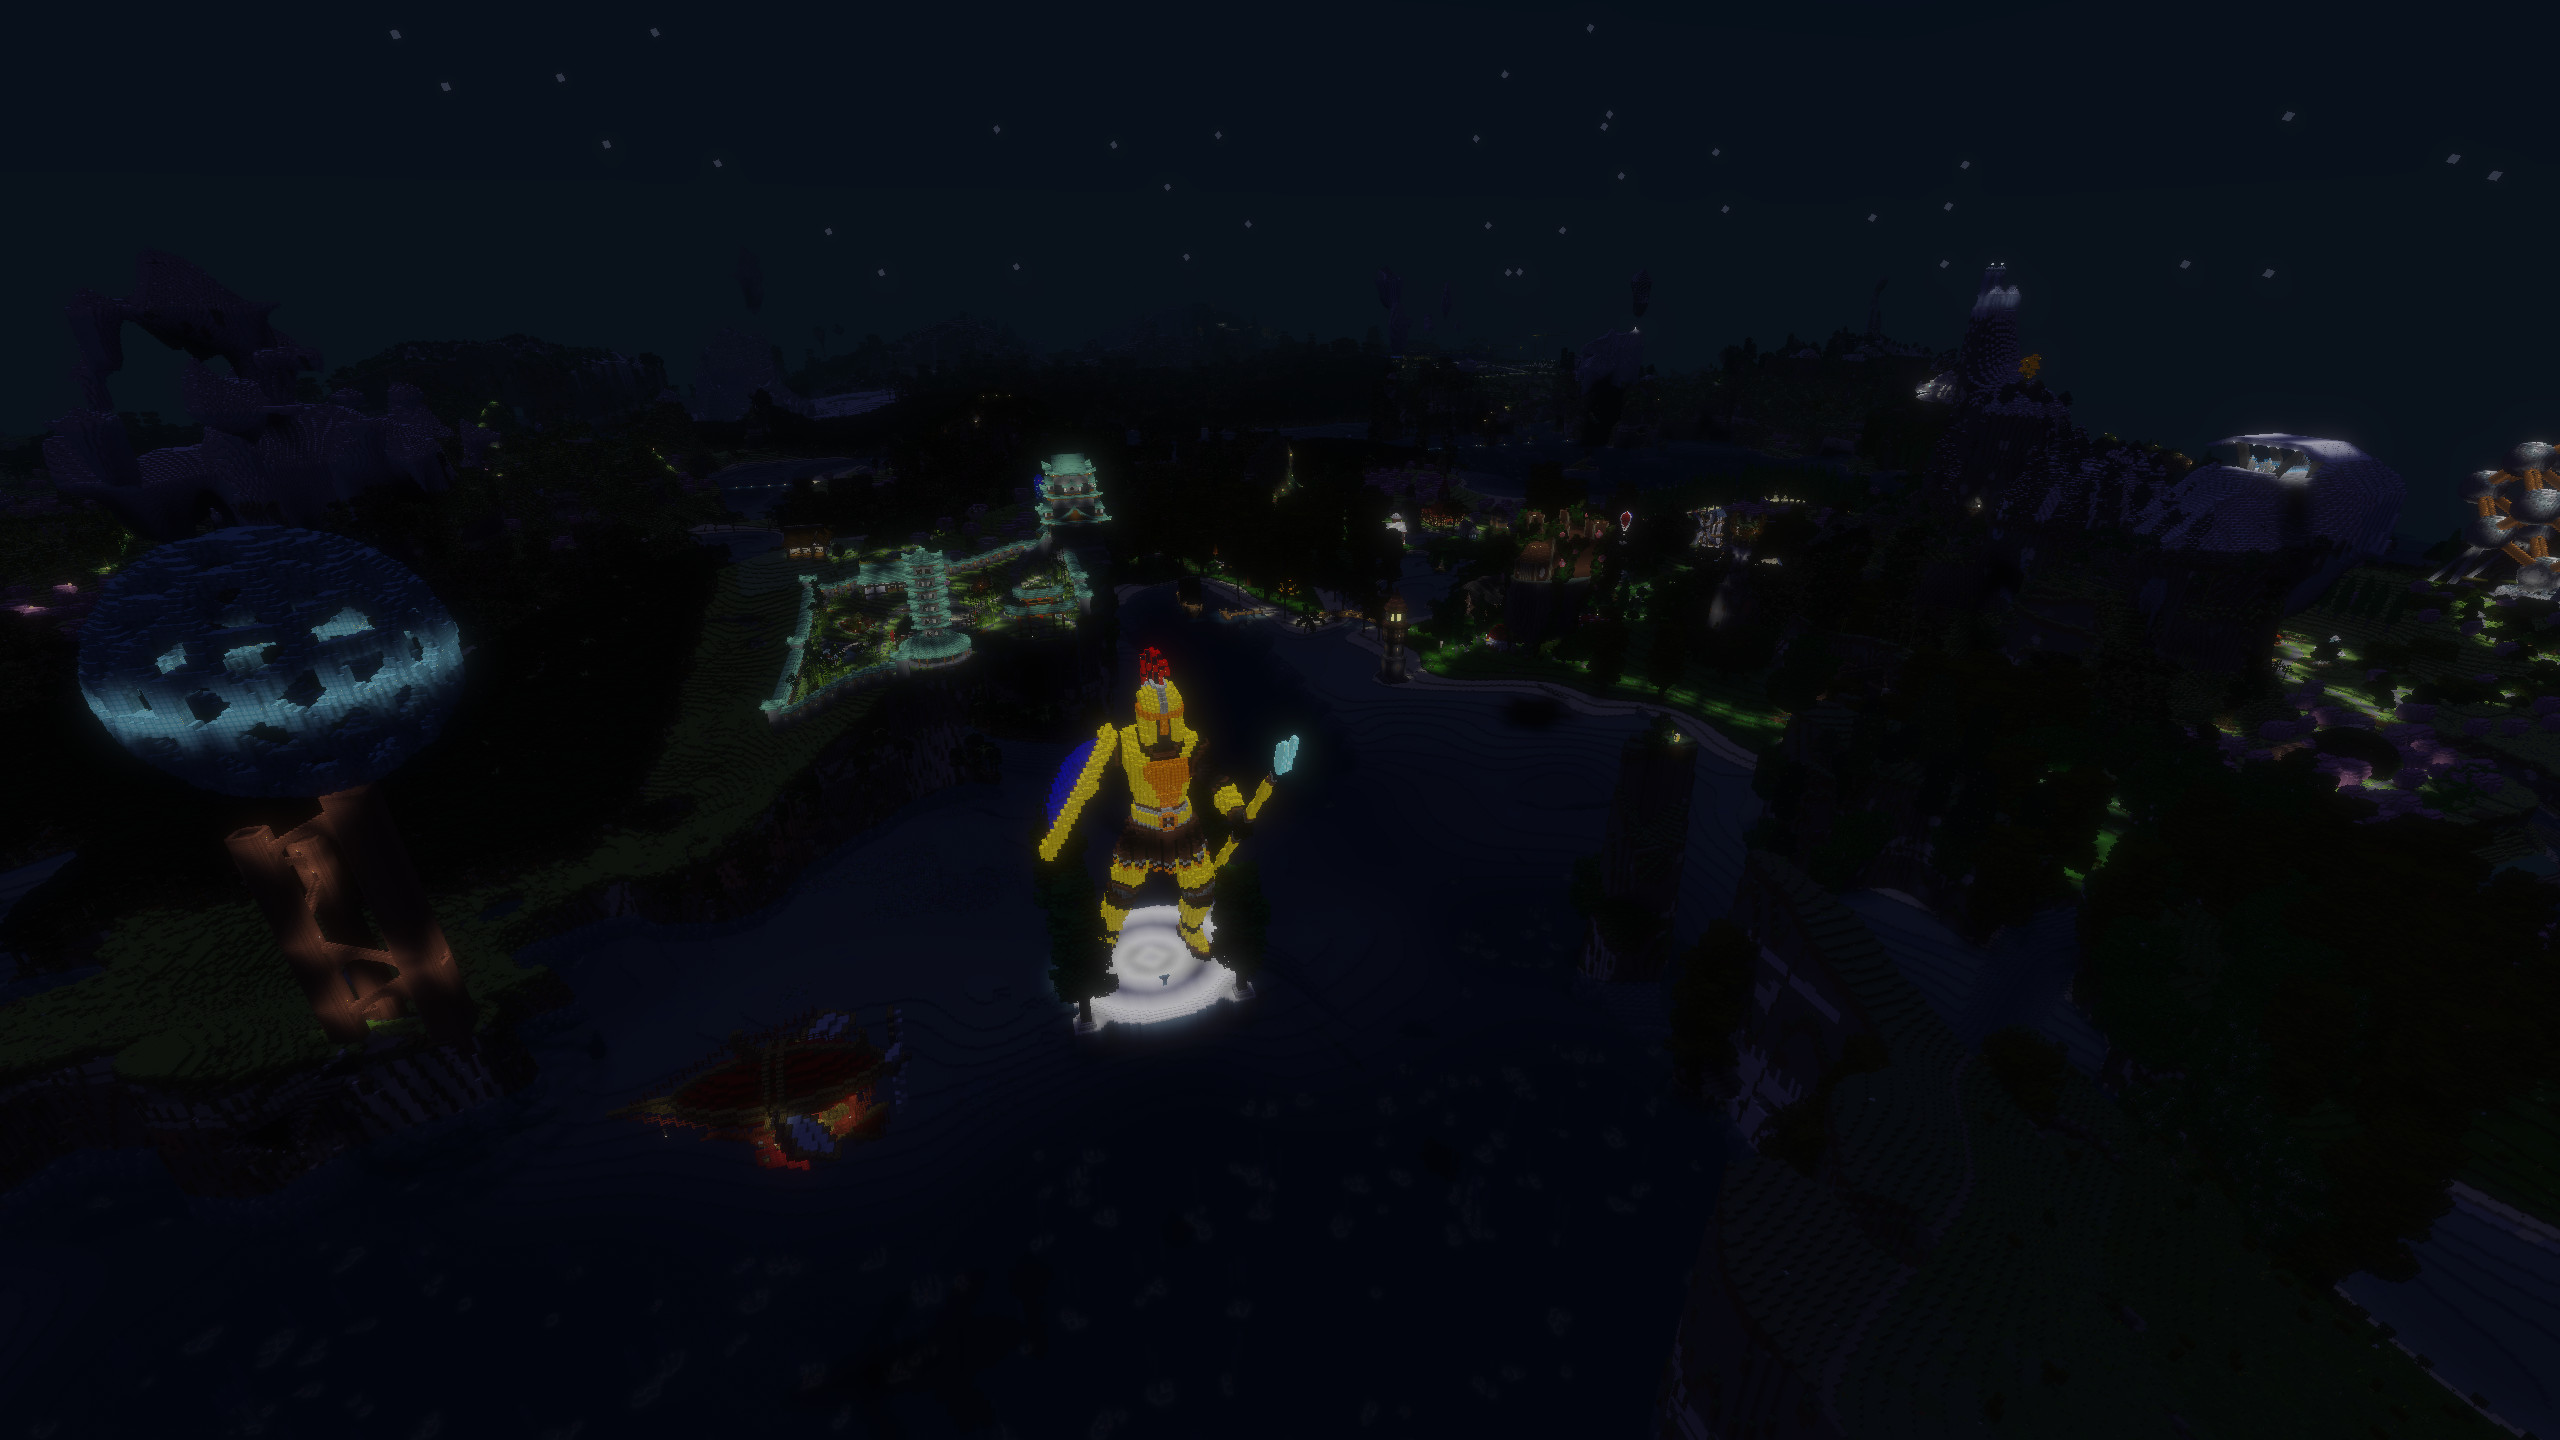 <a target='_blank' href='https://map.wunderwelt.one/#!/map/0/12/8075/4940'>Spawn</a> area at night